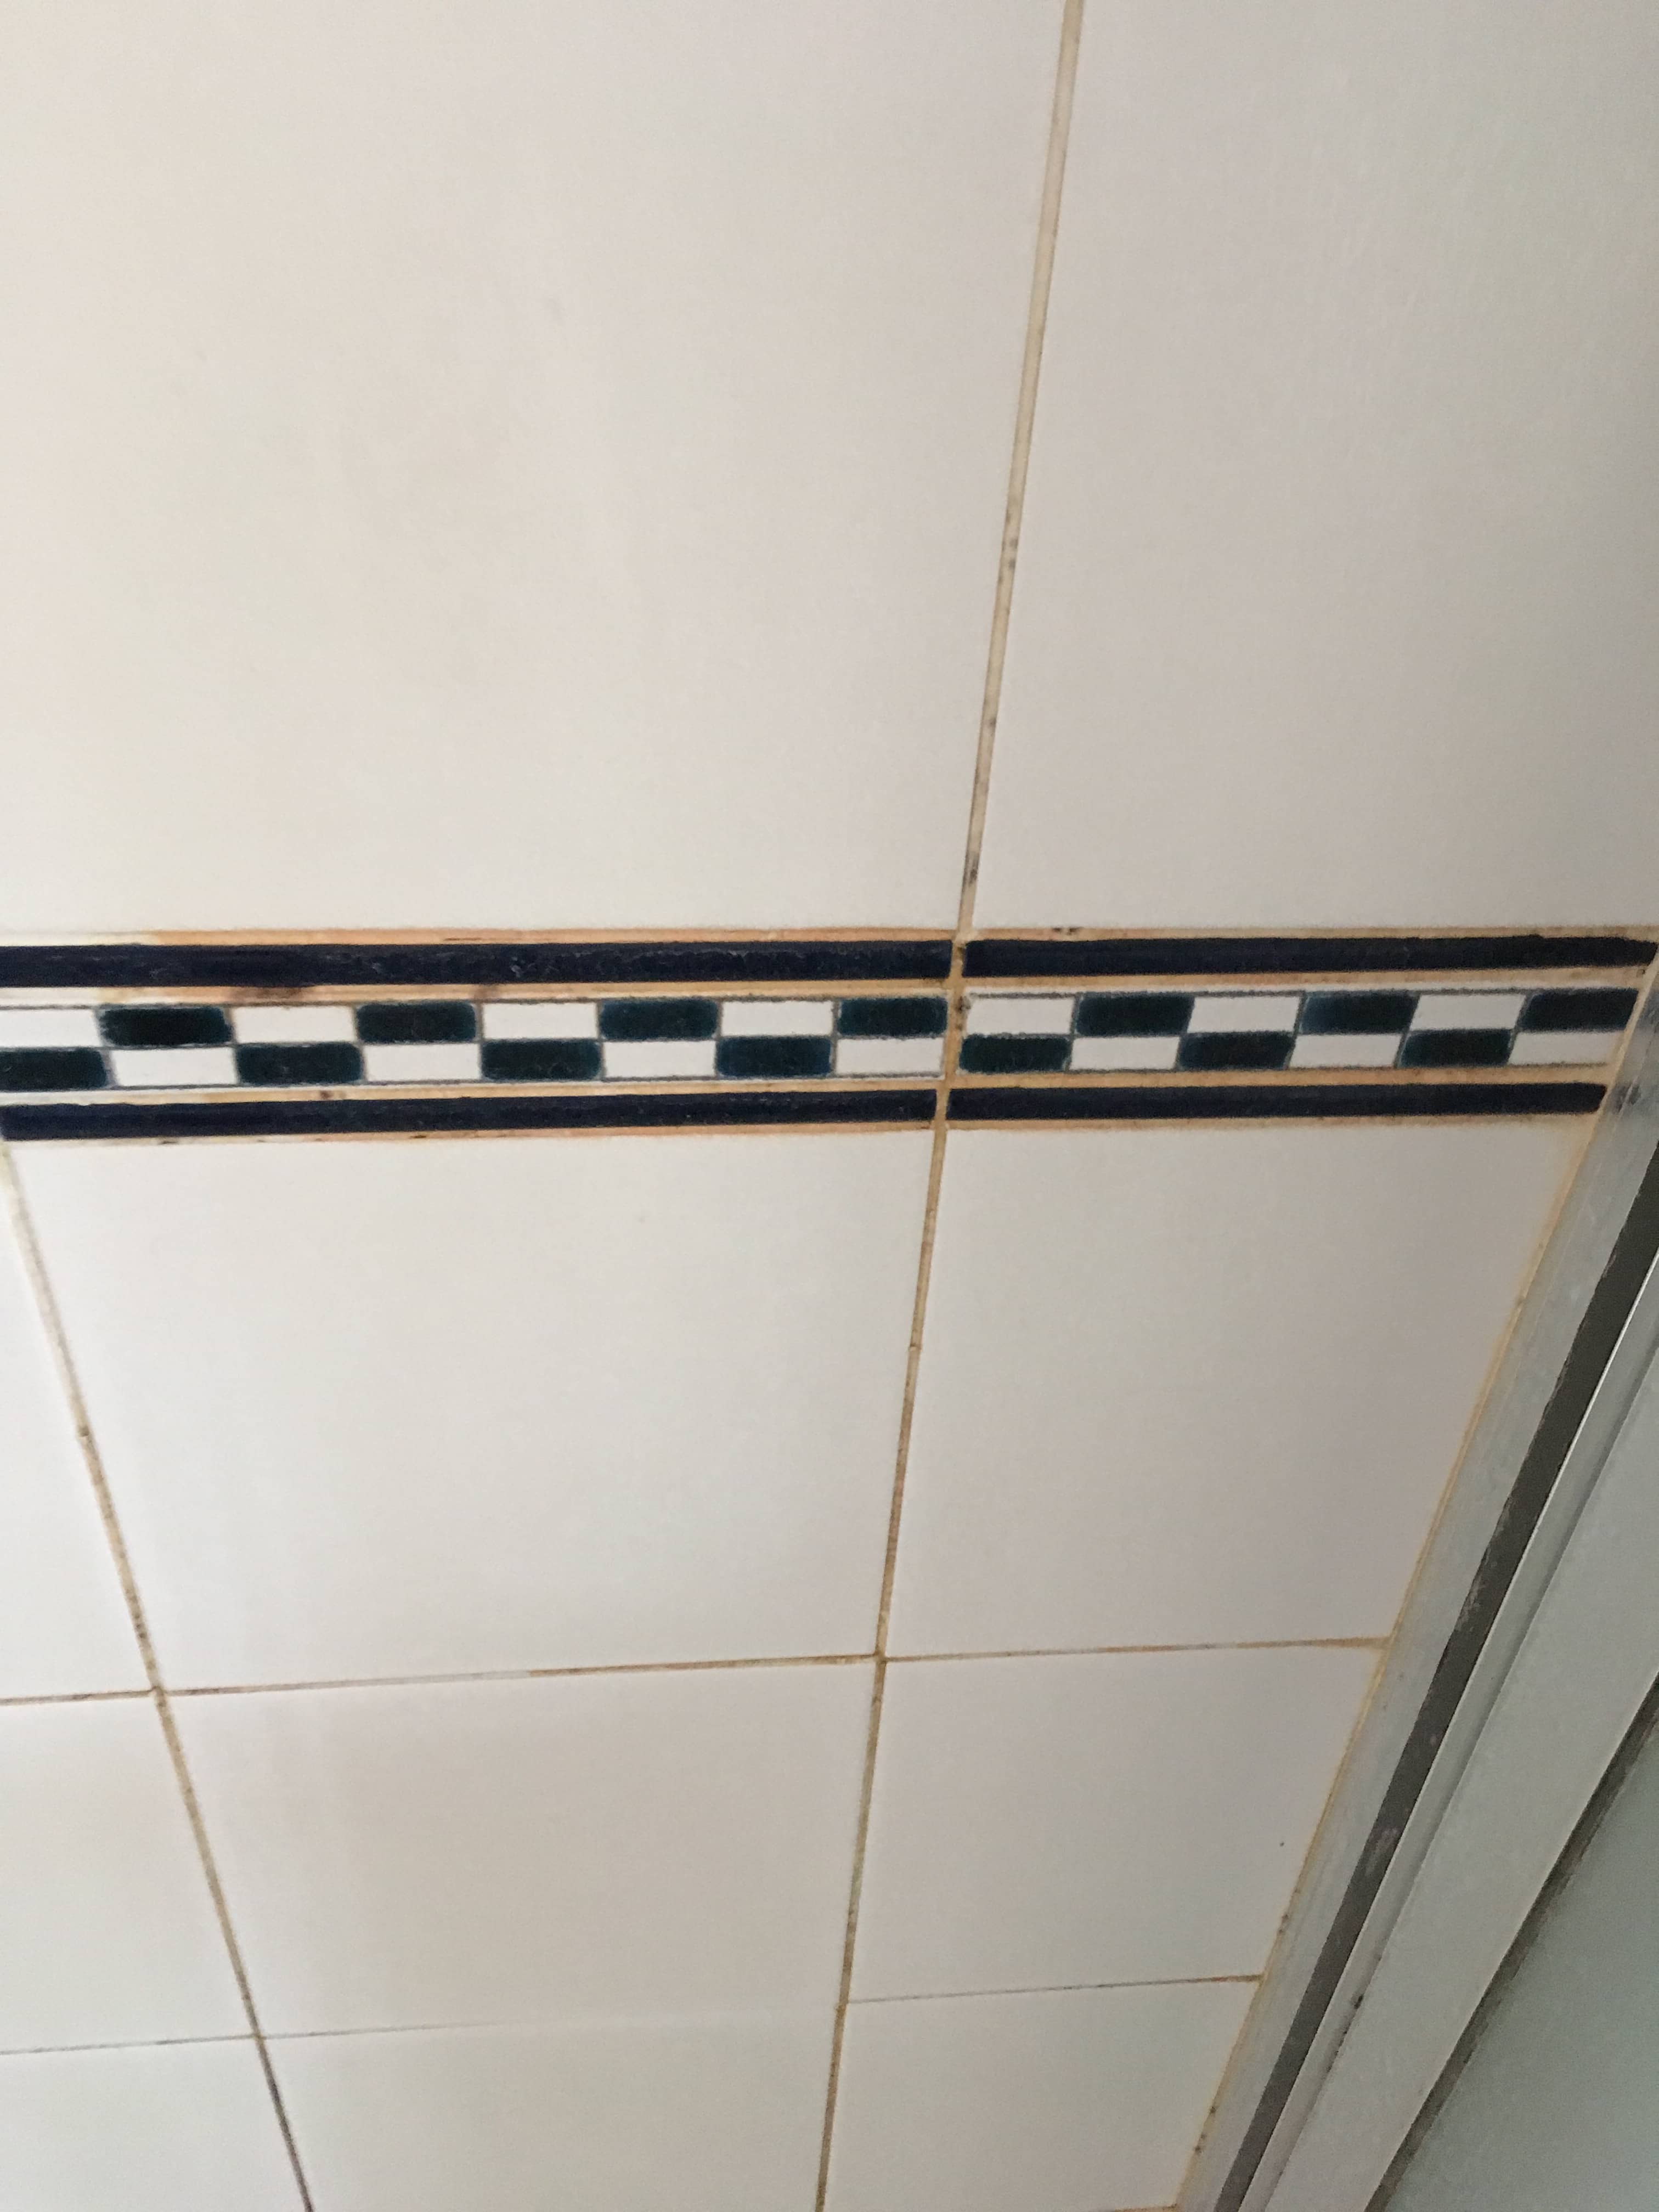 Ceramic Tiled Shower Cubicle Before Cleaning Shepperton